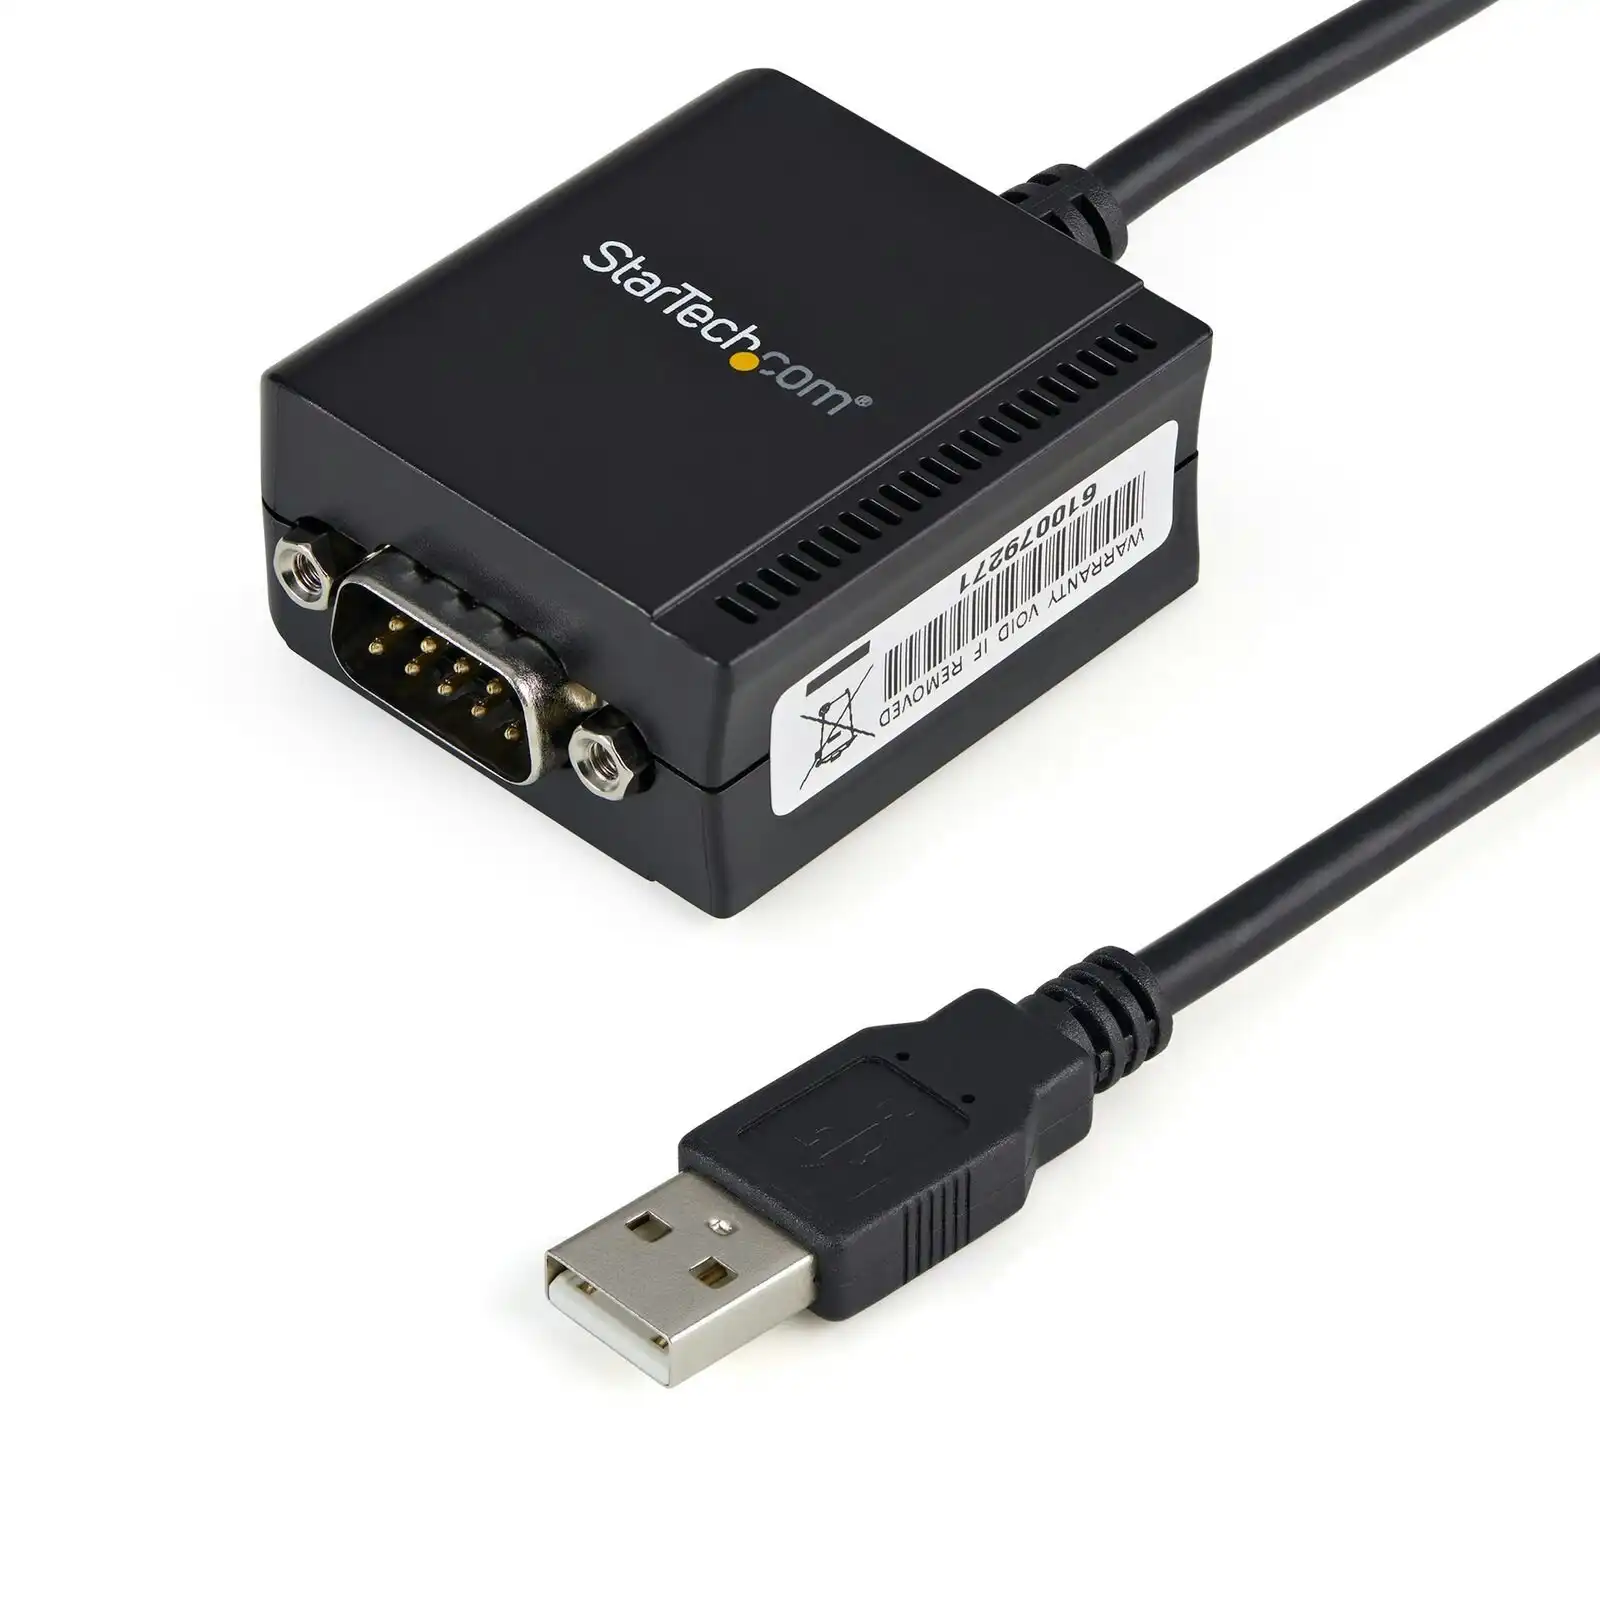 Star Tech 1-Port FTDI USB to Serial RS232 Adapter Cable Cord for Laptop/Computer